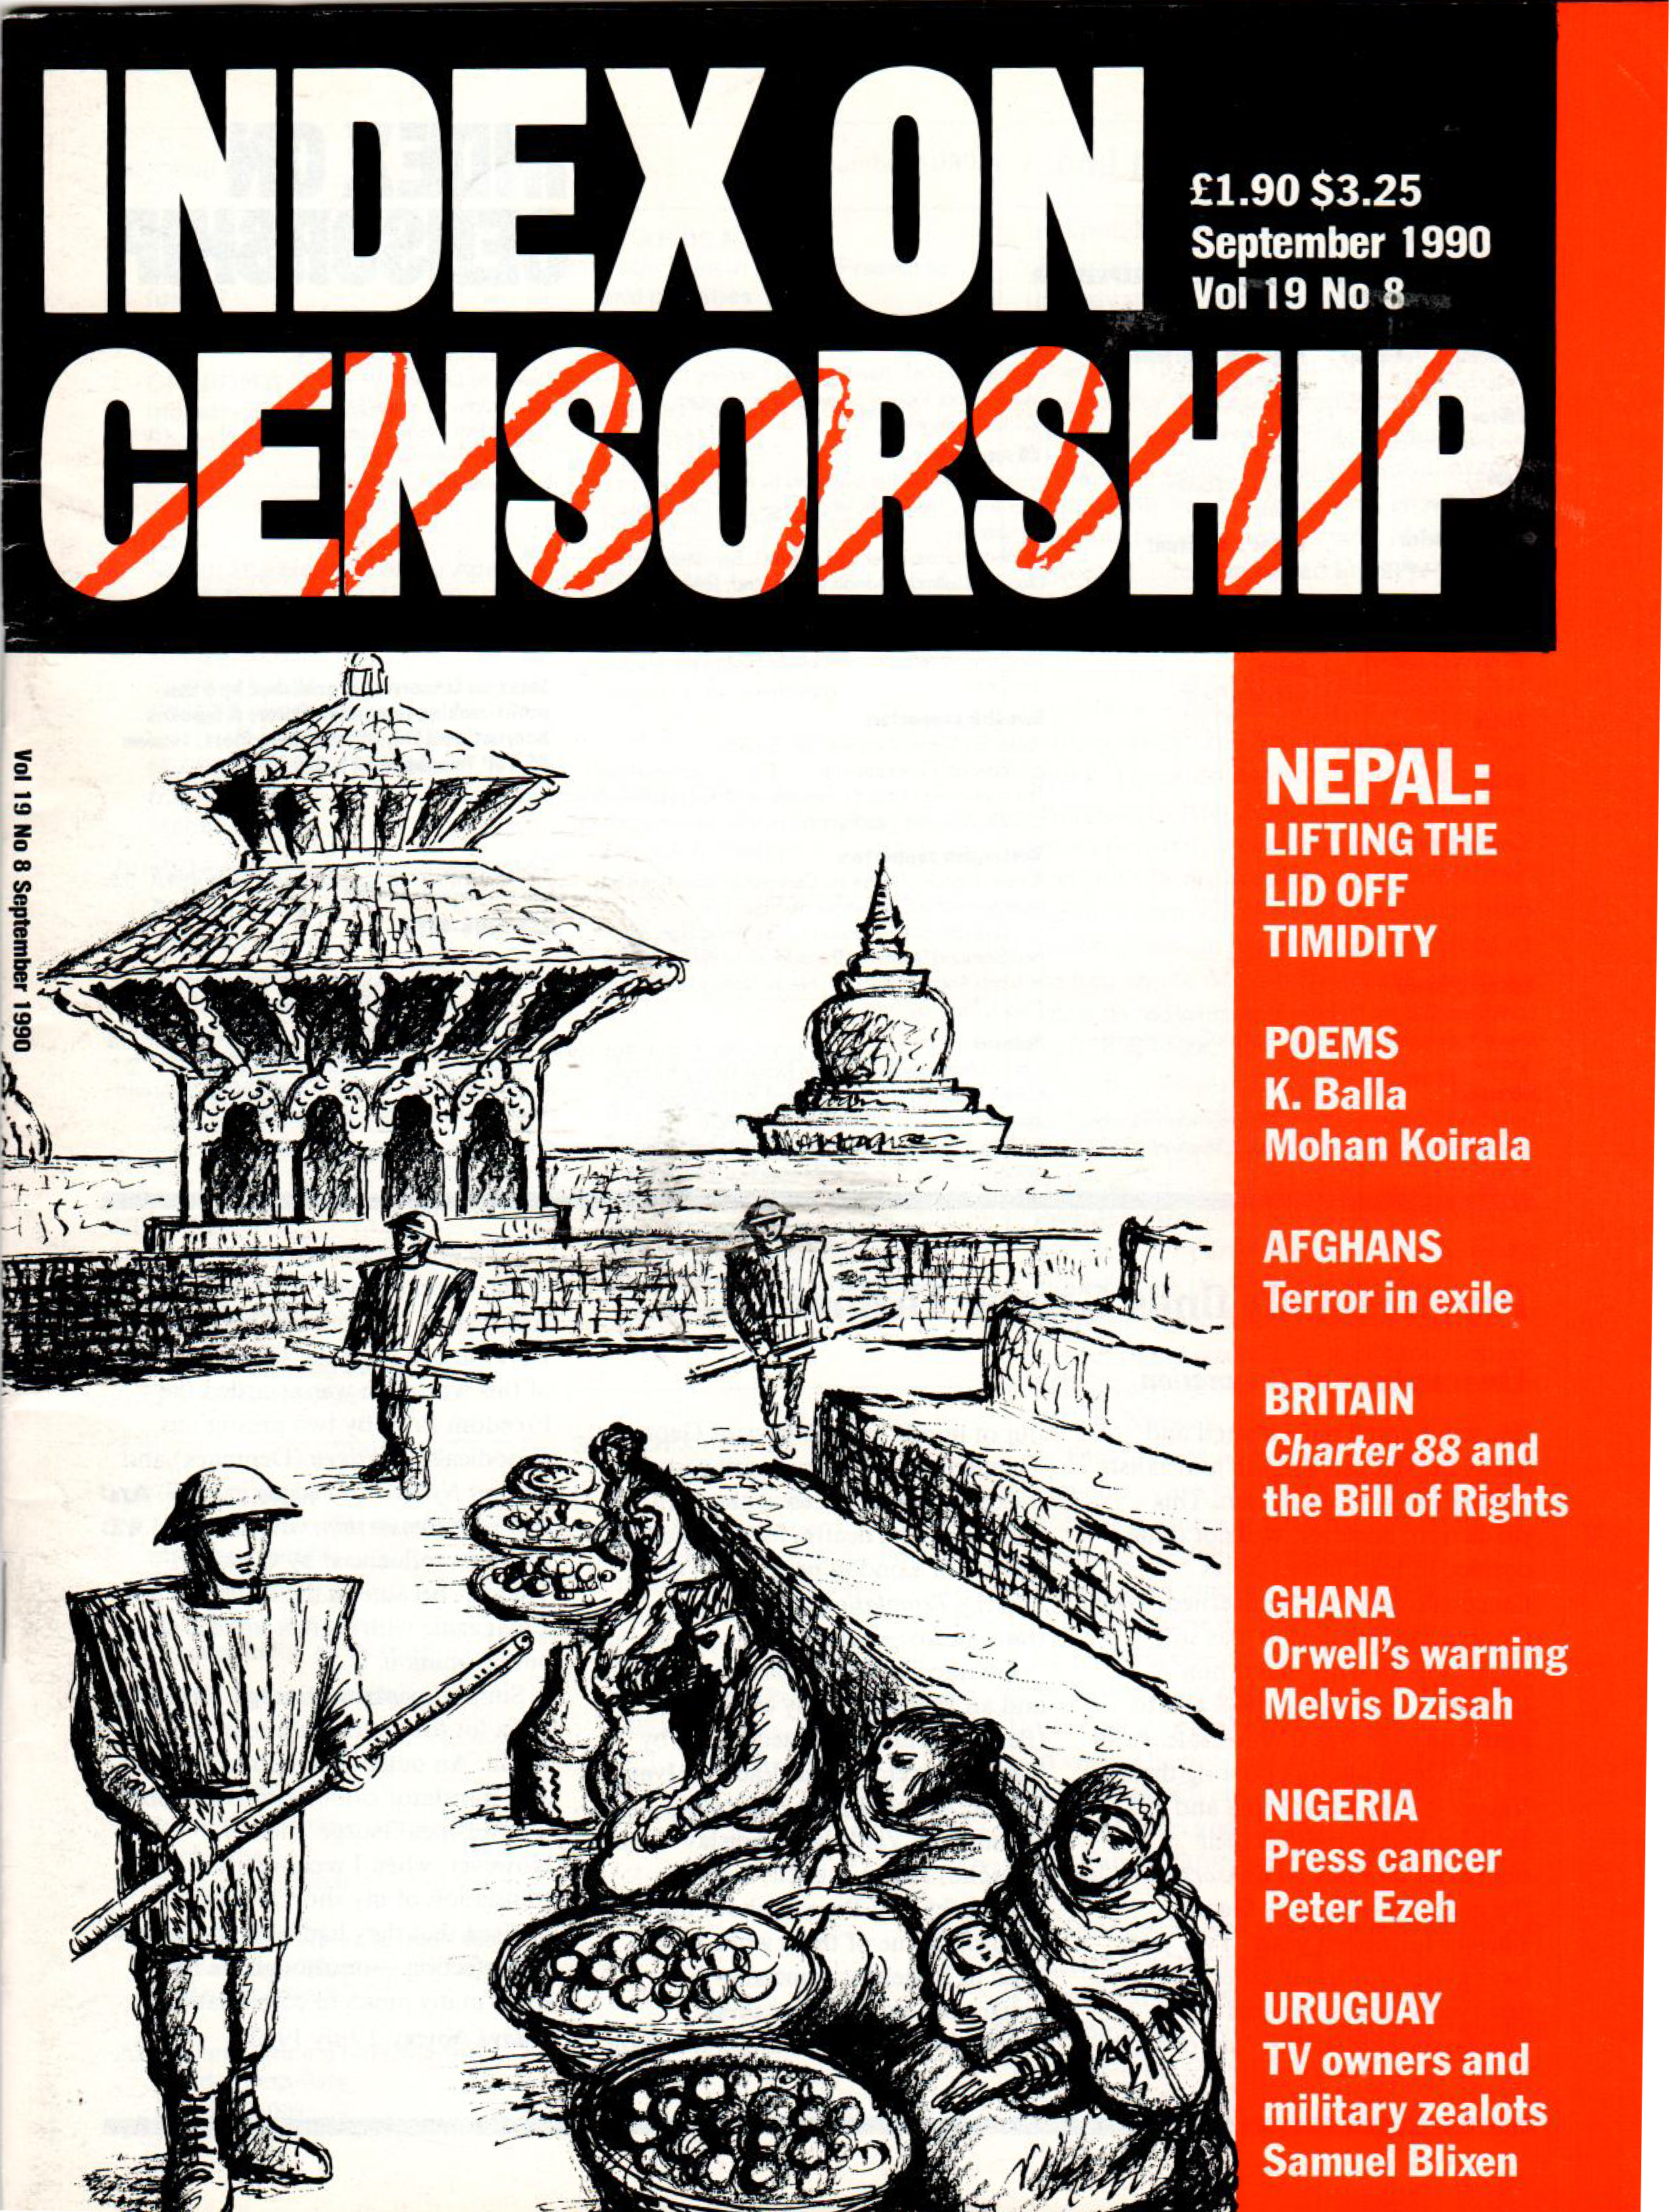 Nepal: lifting the lid off timidity, the September 1990 issue of Index on Censorship magazine.